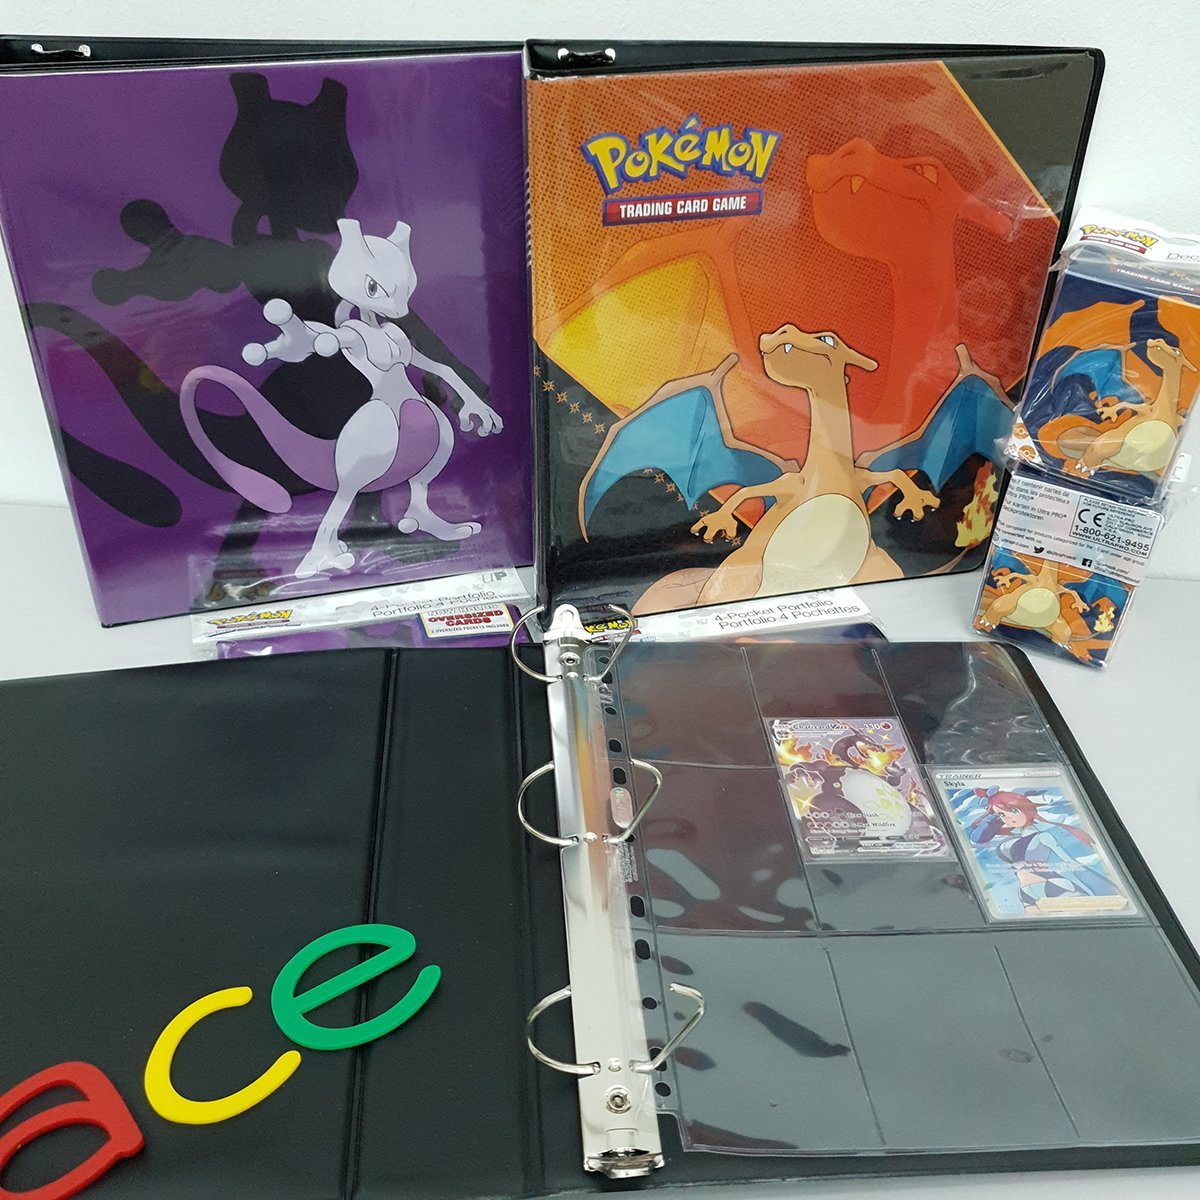 Ultra PRO Card Album Pokemon - D-Ring Binder "Charizard"-Ultra PRO-Ace Cards & Collectibles